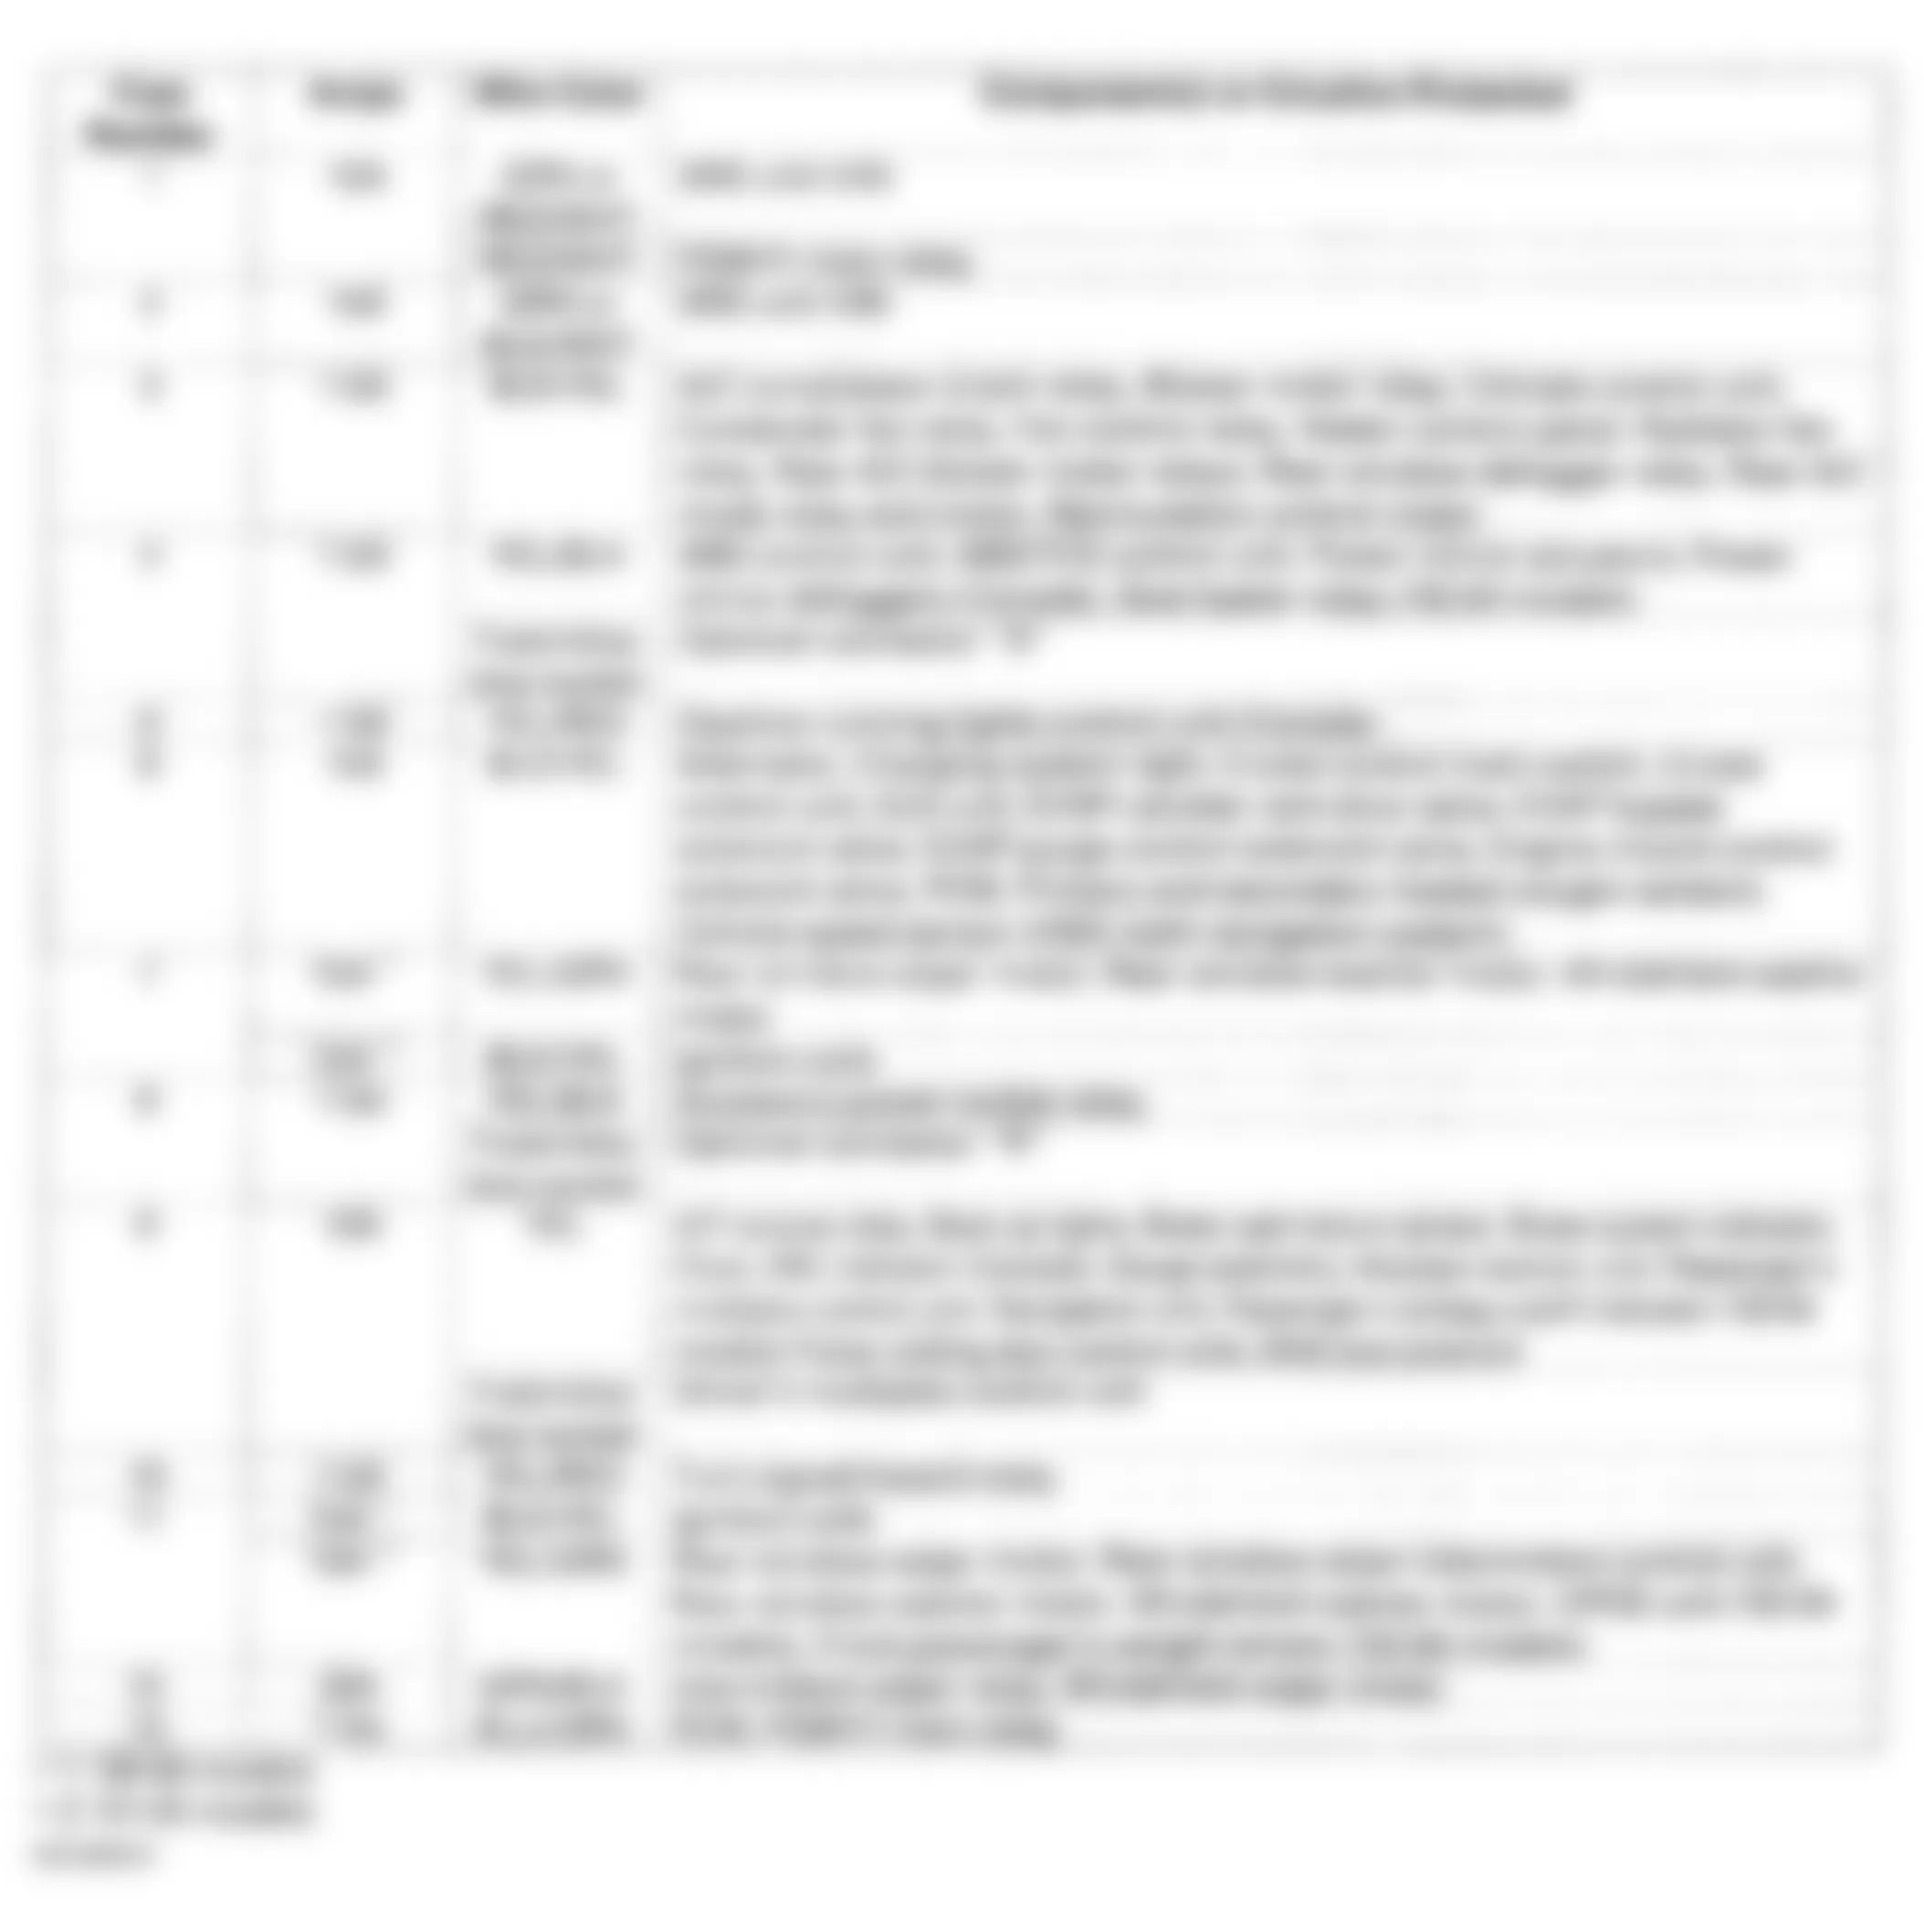 Honda Odyssey LX 2001 - Component Locations -  Drivers Under-Dash Fuse/Relay Box Identification Chart